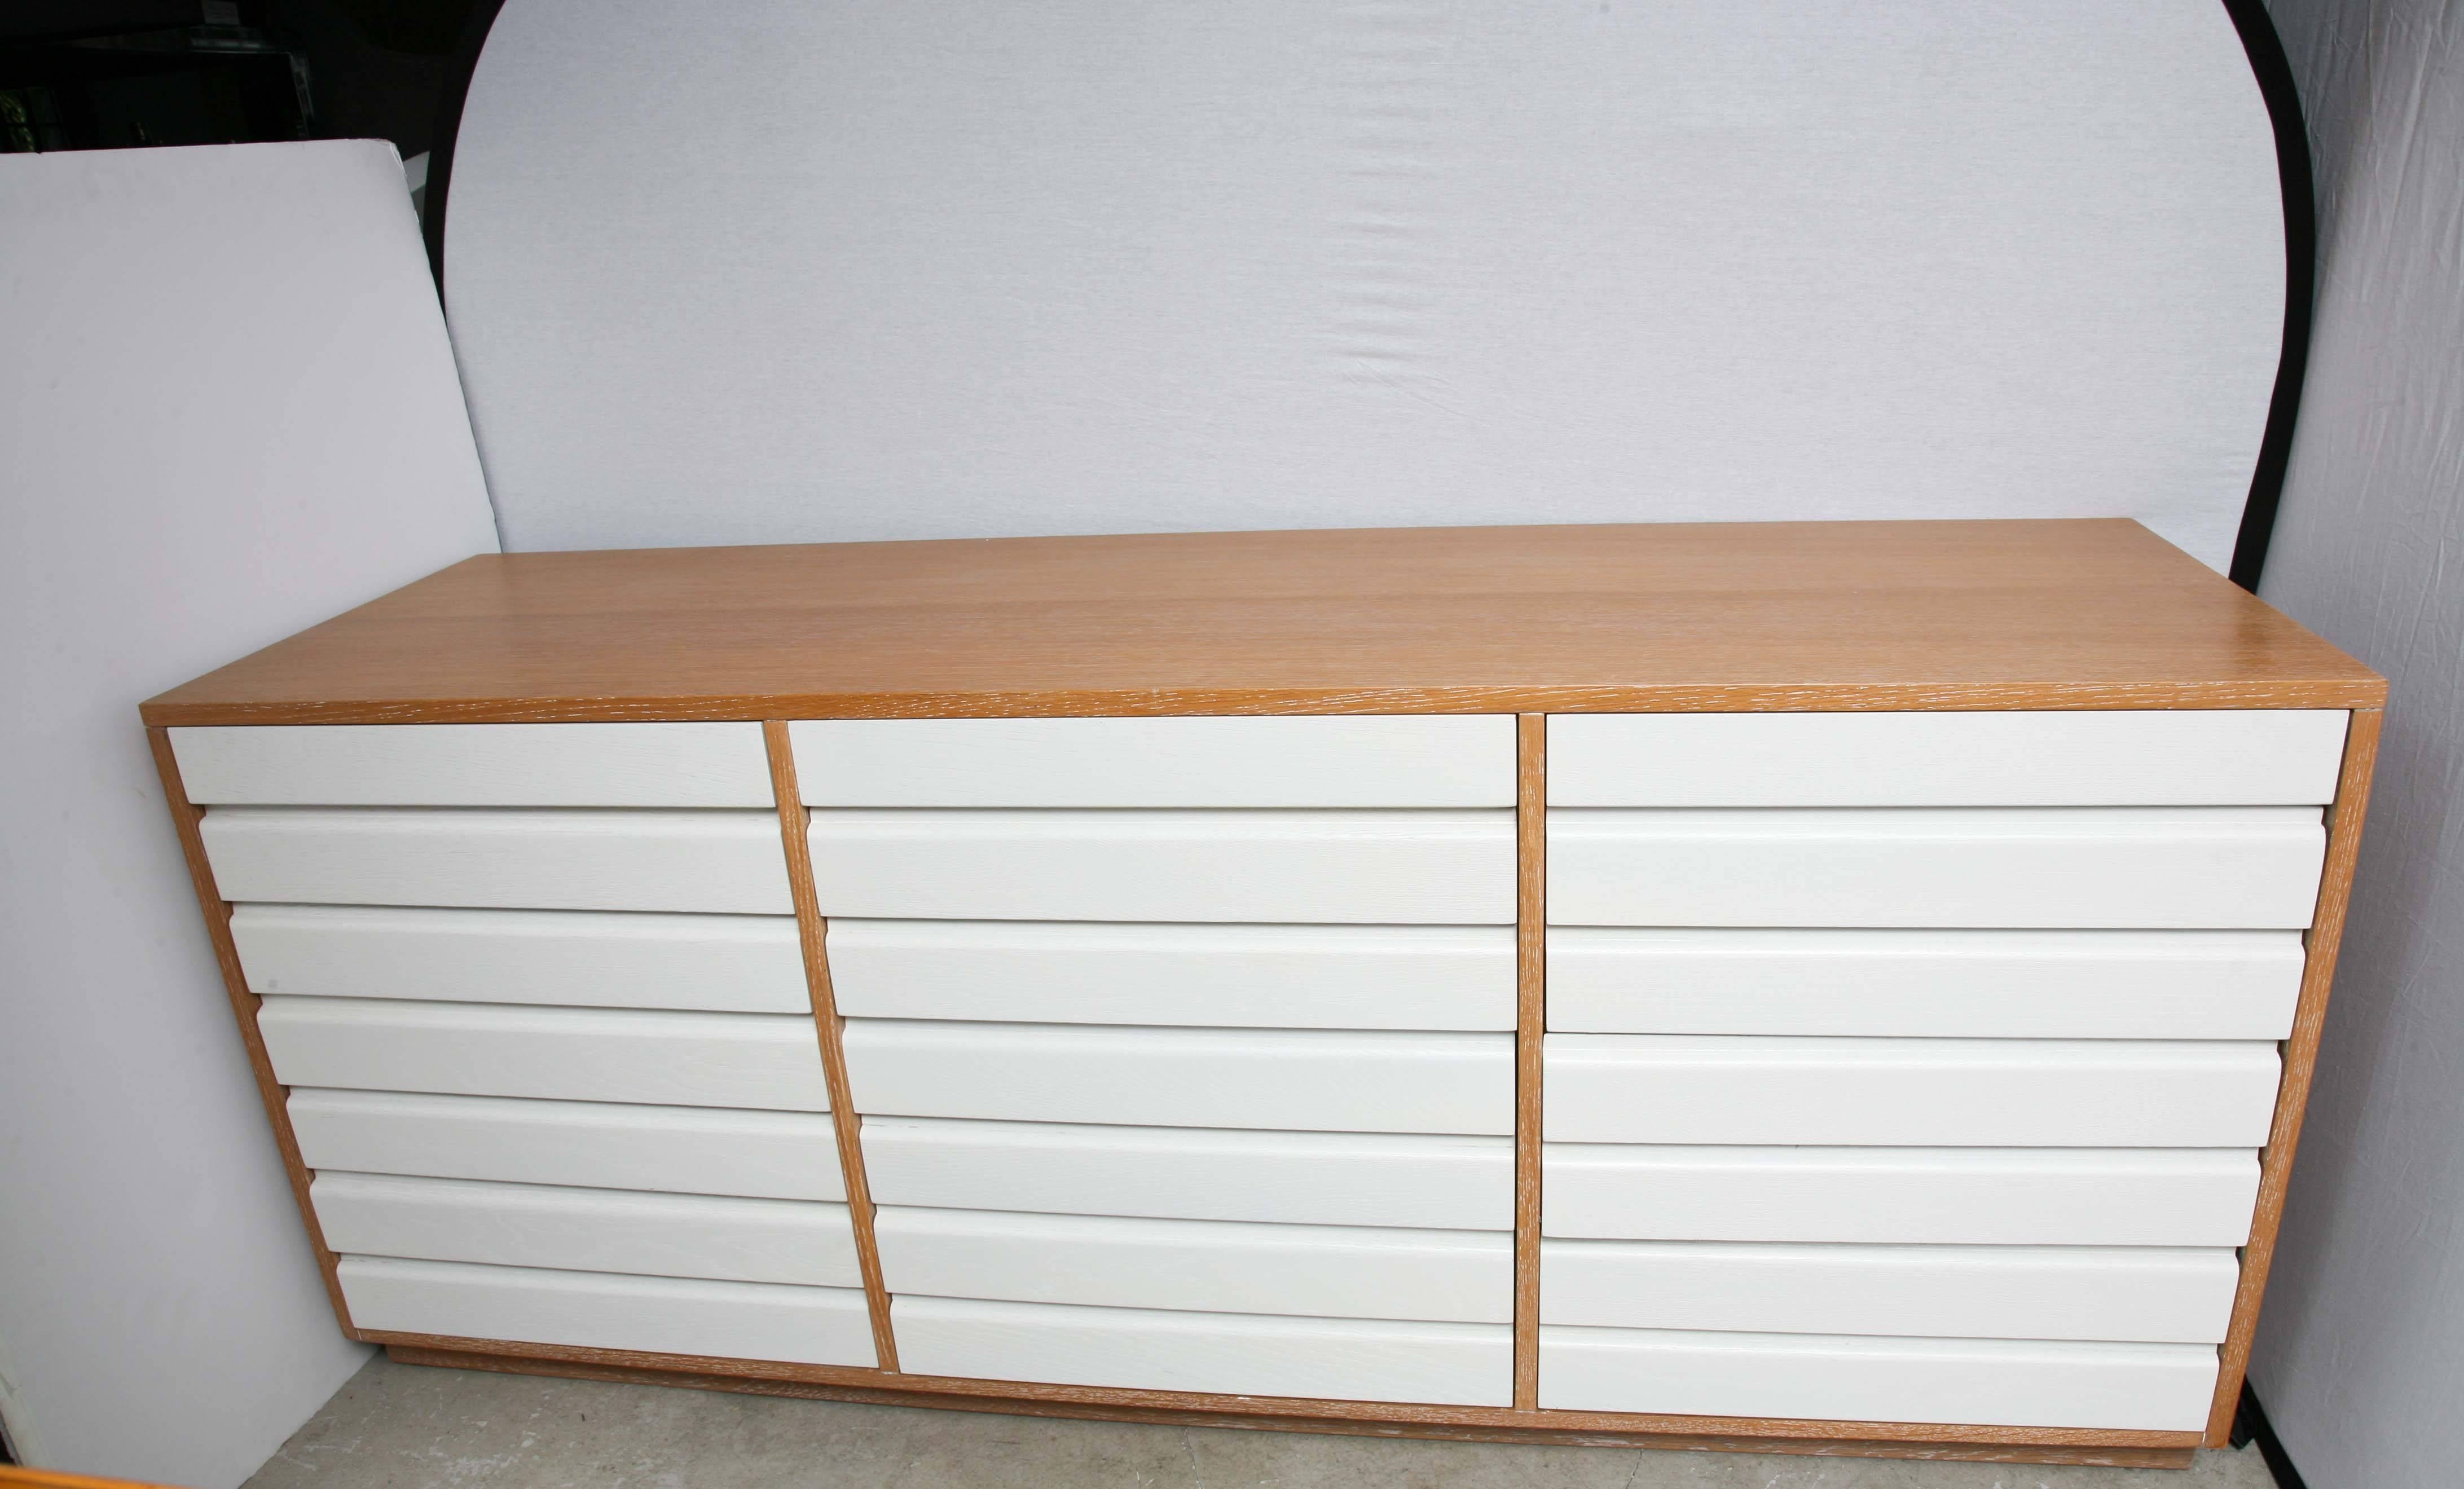 Oakwood construction with a cerused finish and 12 painted white pull-out drawers. Cabinet has been refurbished.